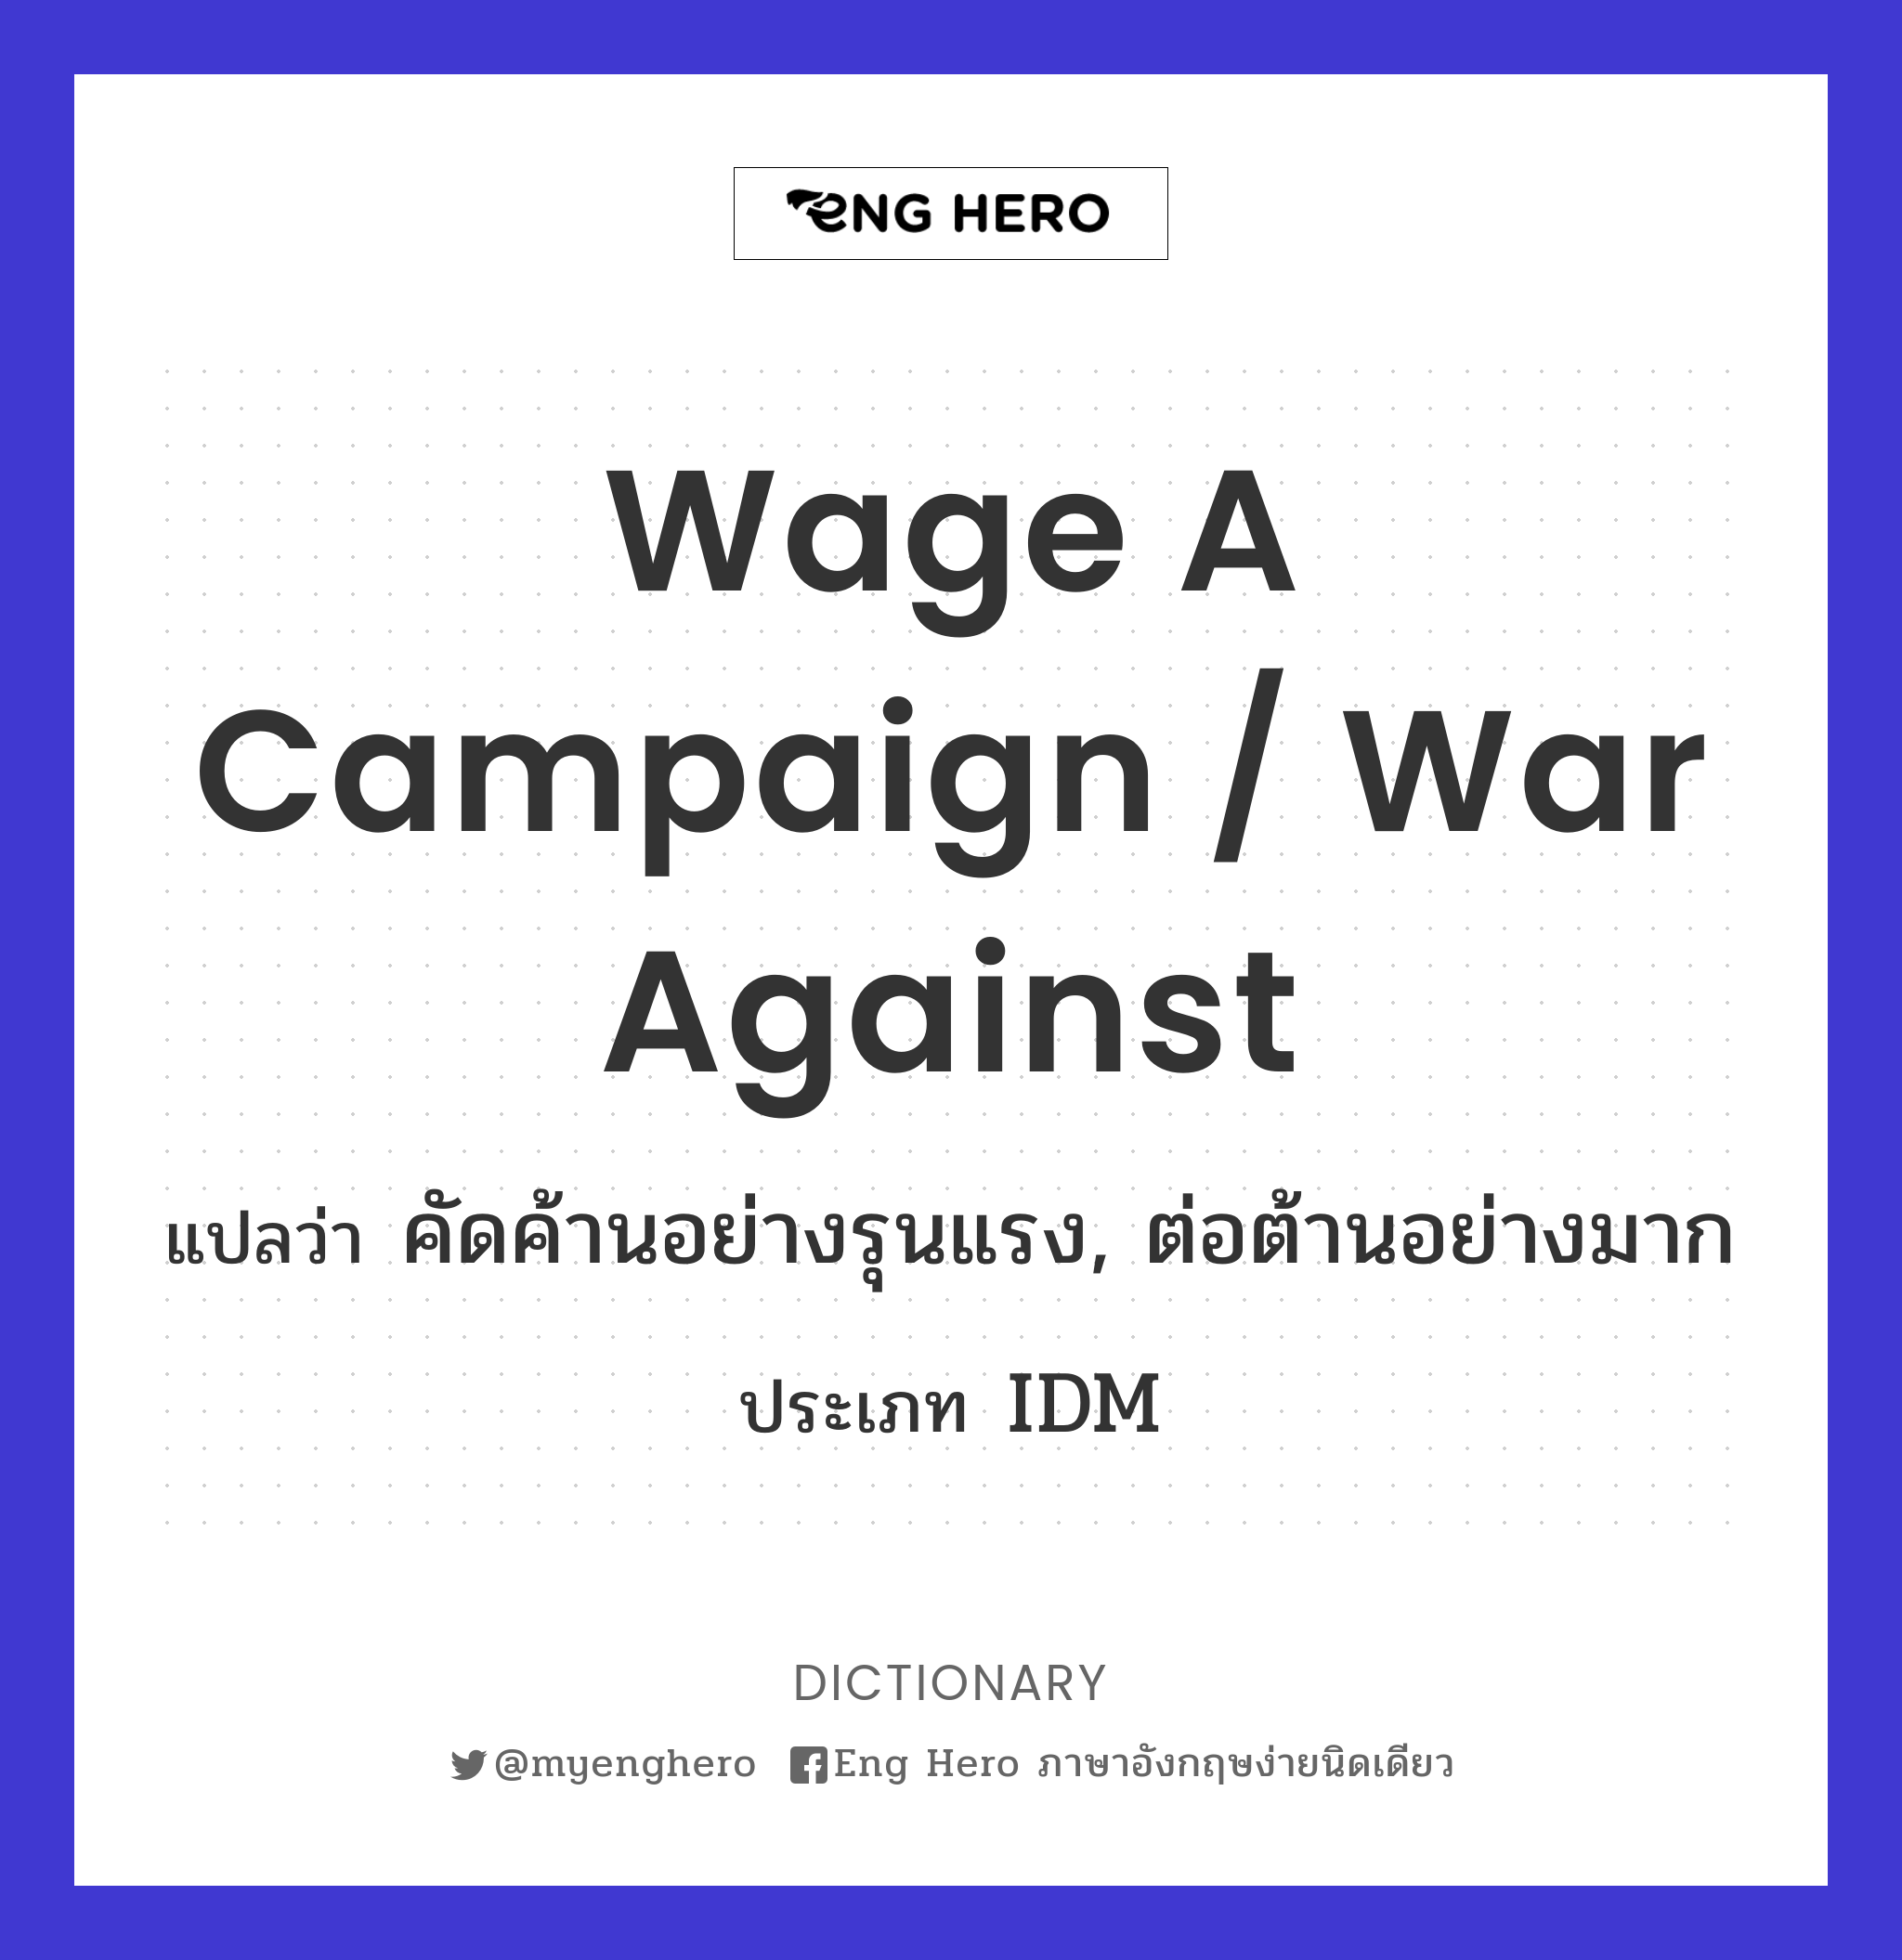 wage a campaign / war against